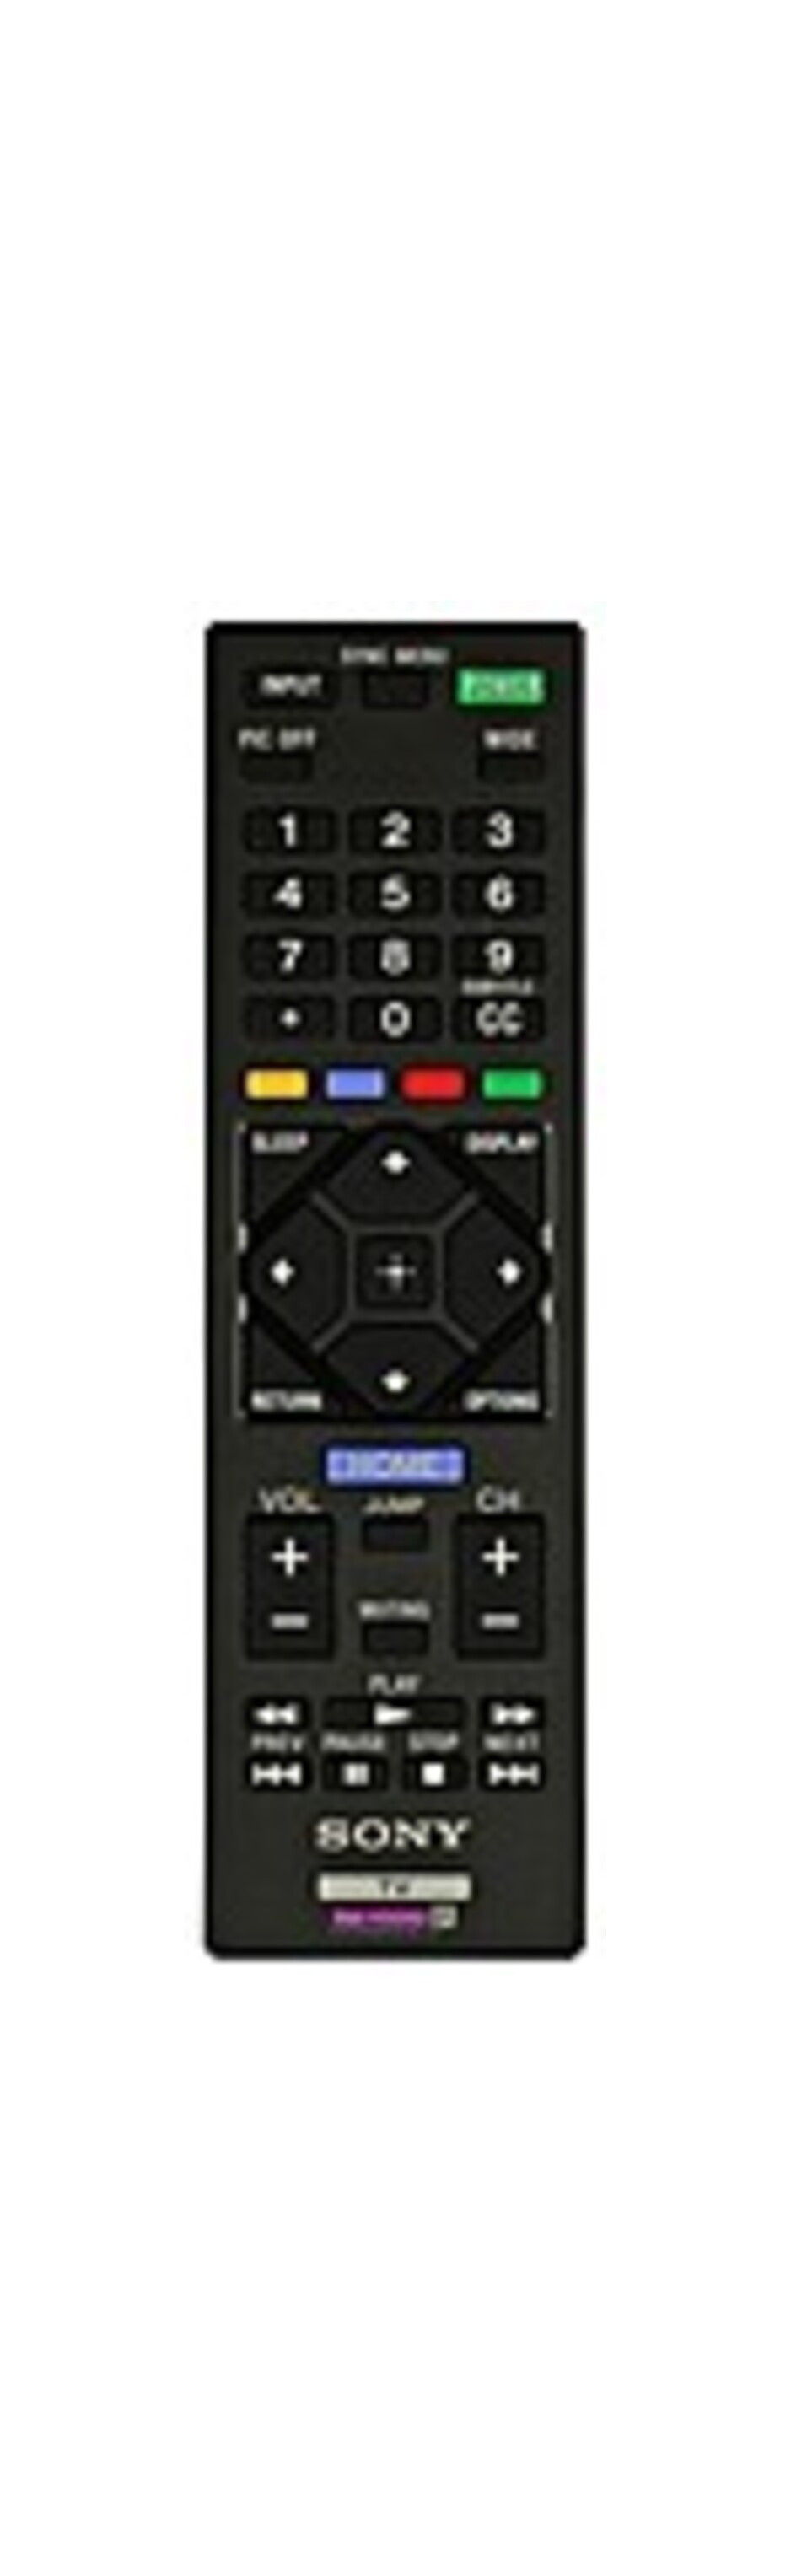 Sony RM-YD092 Remote Control for KDL-32R400A LED TV - 2 x AAA (Not Included)